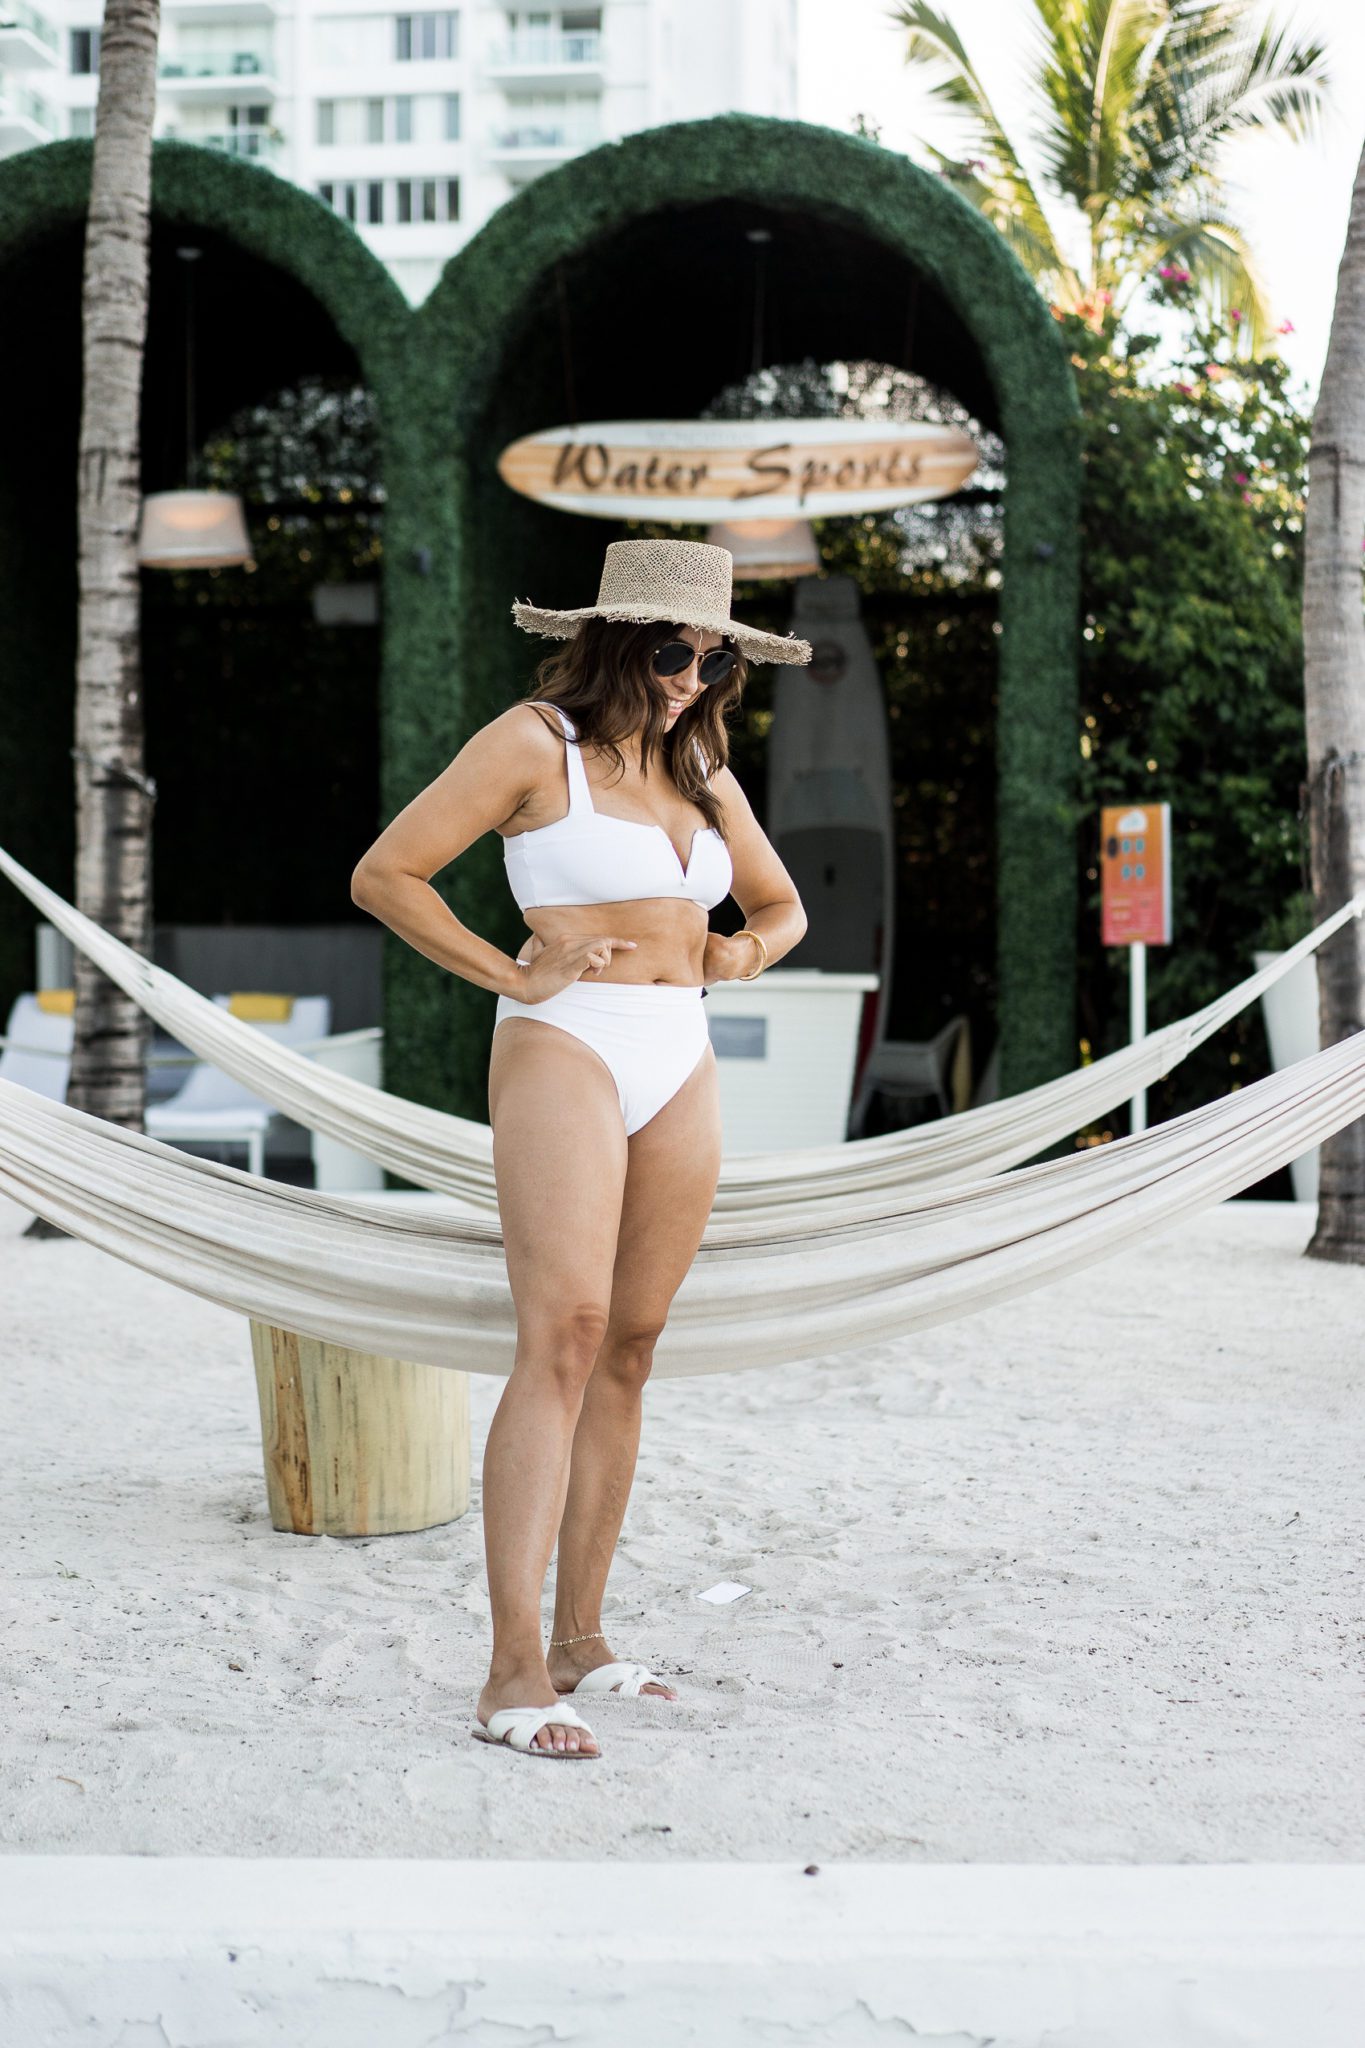 Best Swimsuits For Pear-Shaped Bodies: How To Find A Flattering